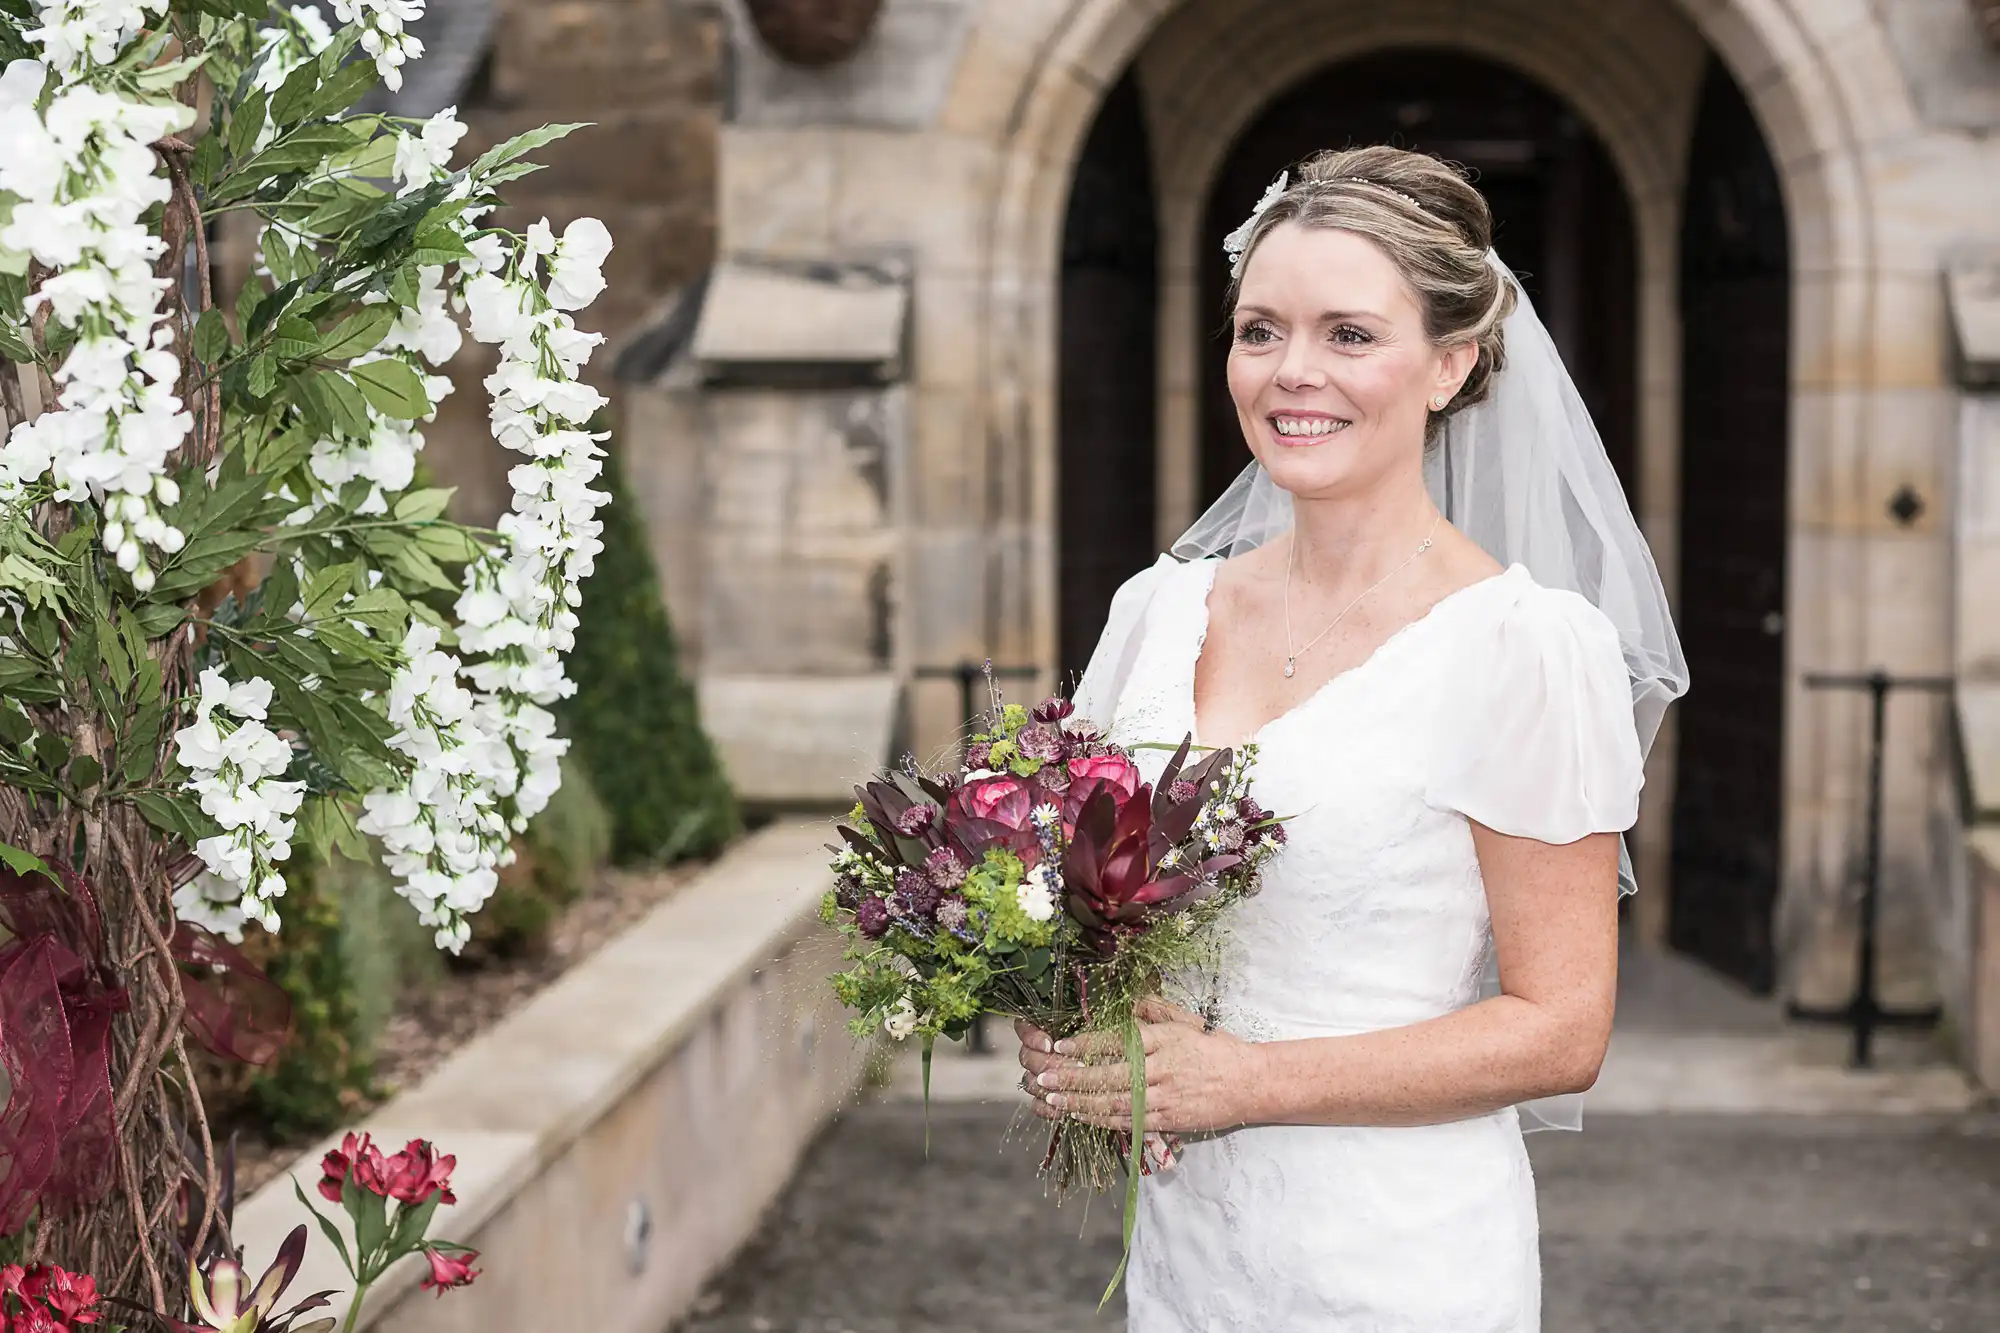 A smiling bride holding a bouquet, standing in front of a stone building with white flowers on the left.